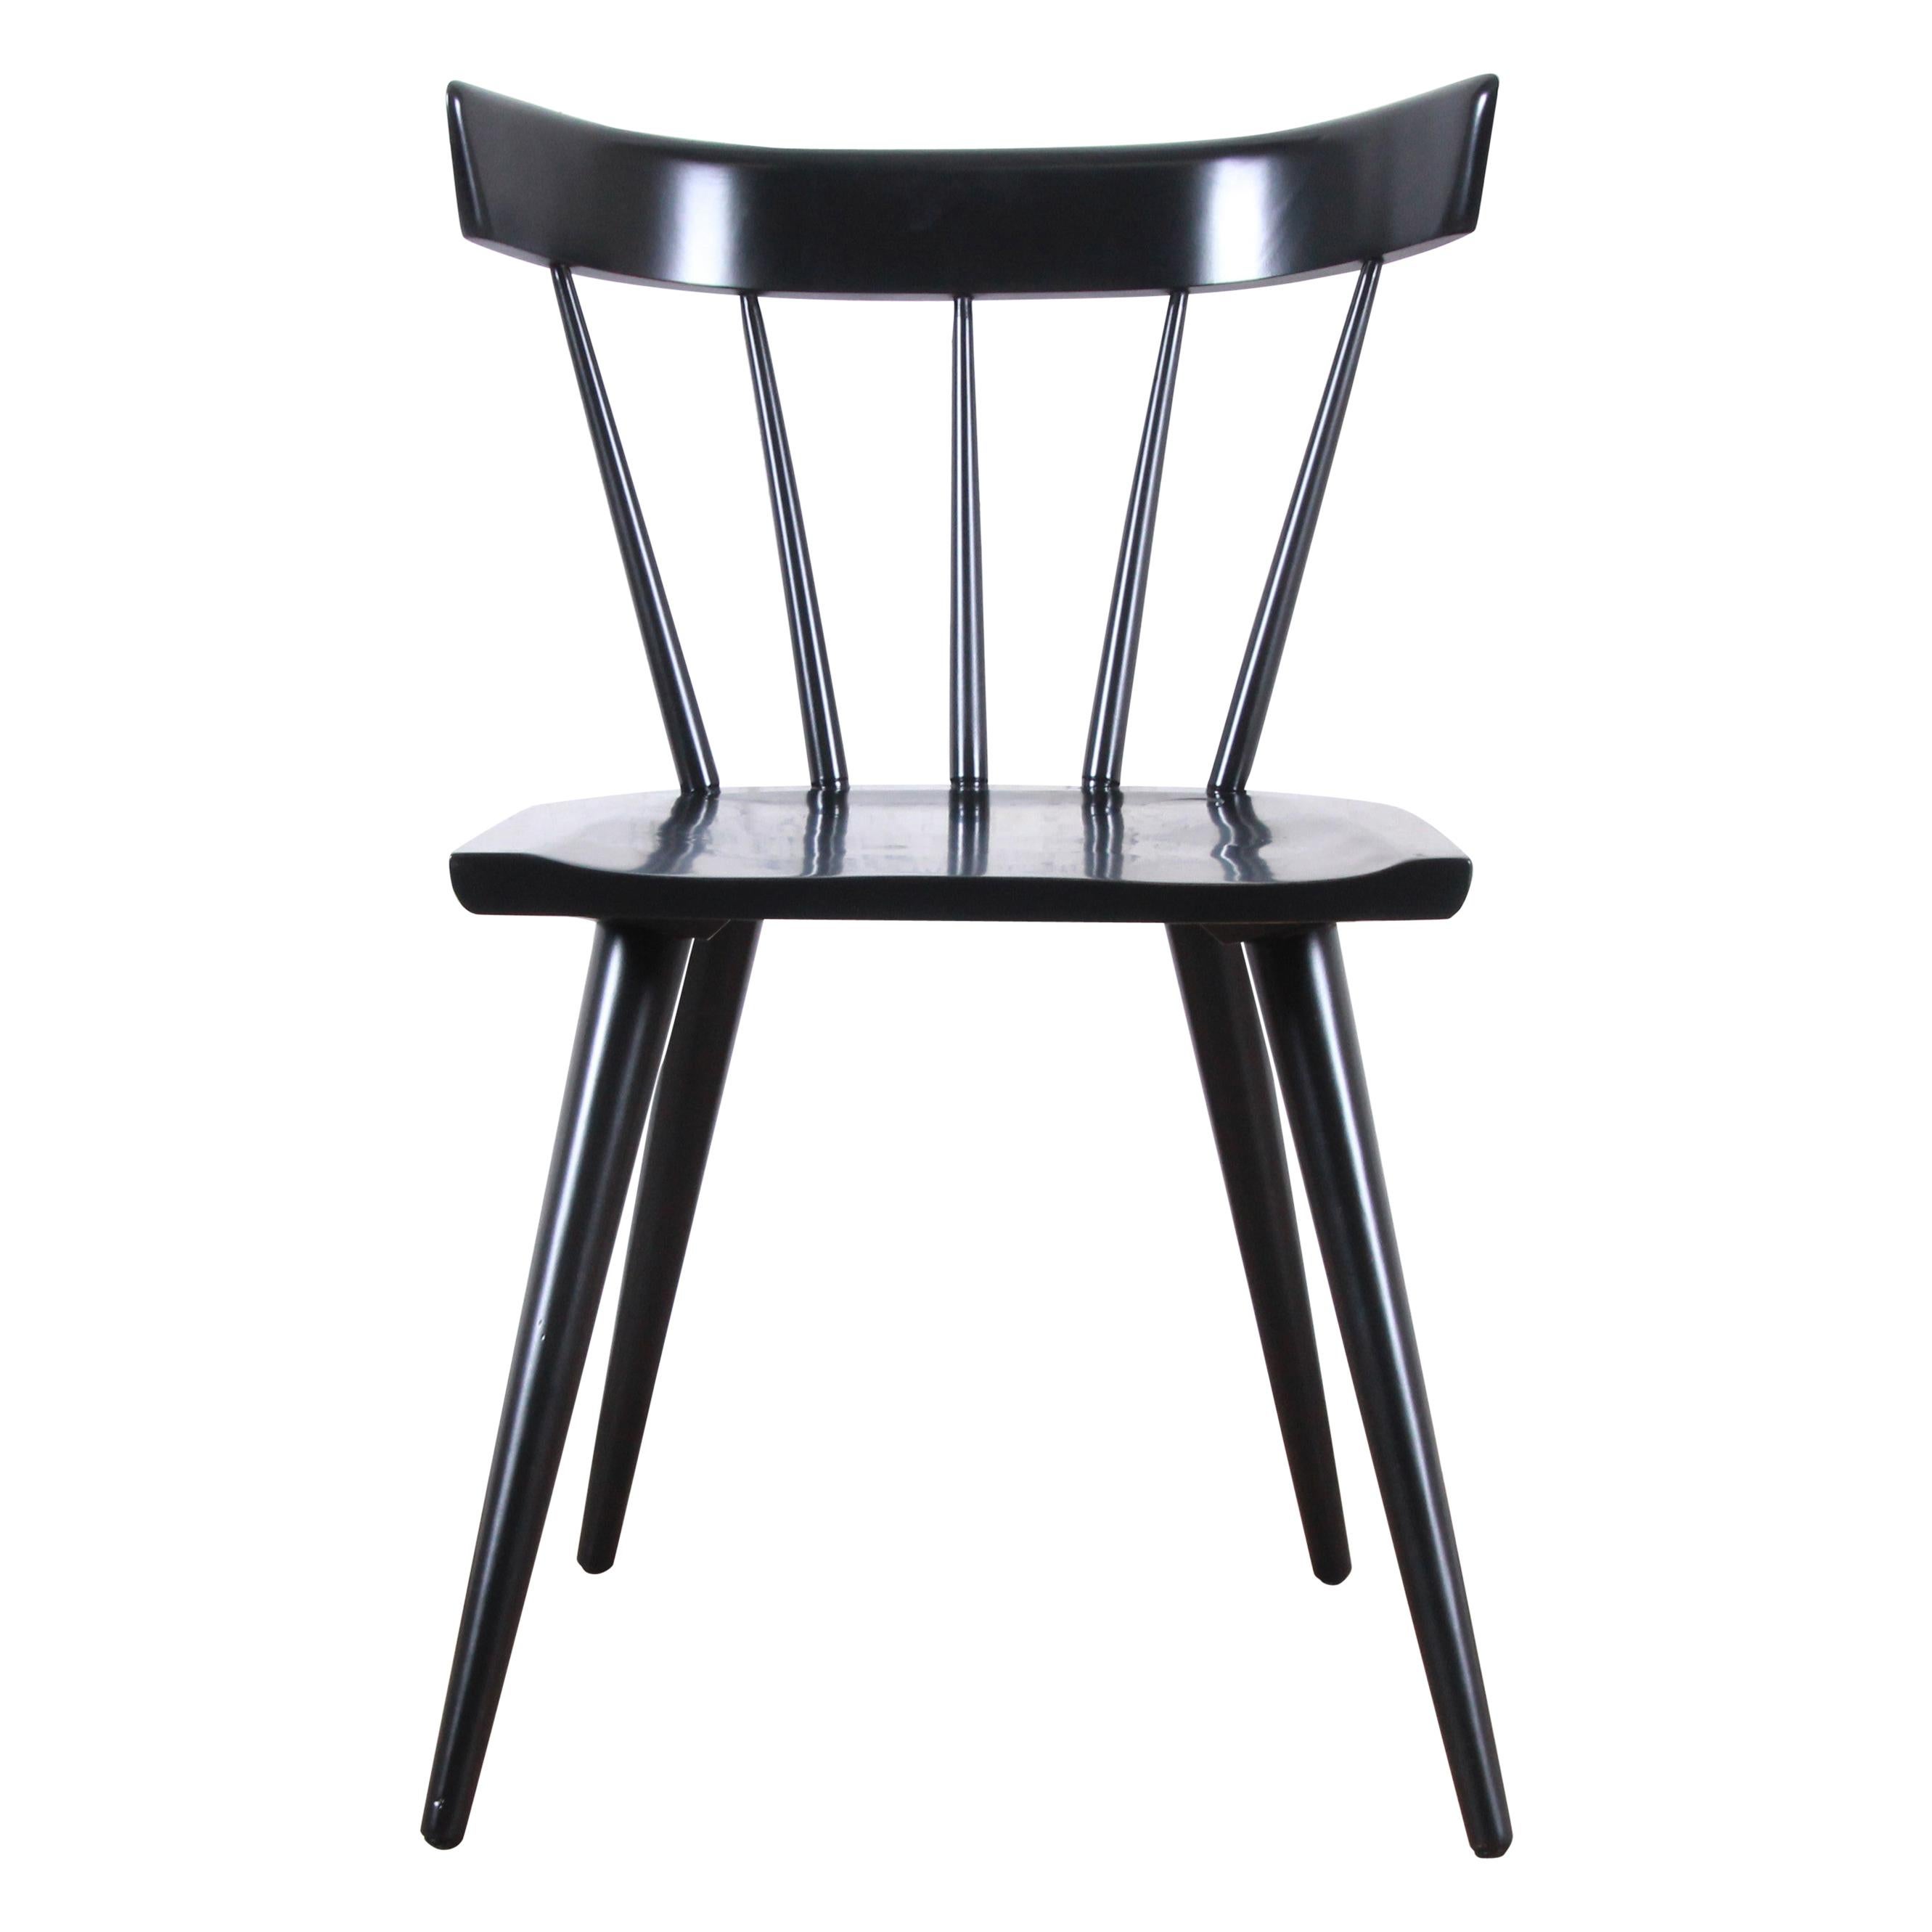 Paul McCobb Planner Group Black Lacquered Spindle Back Dining Chair, Restored